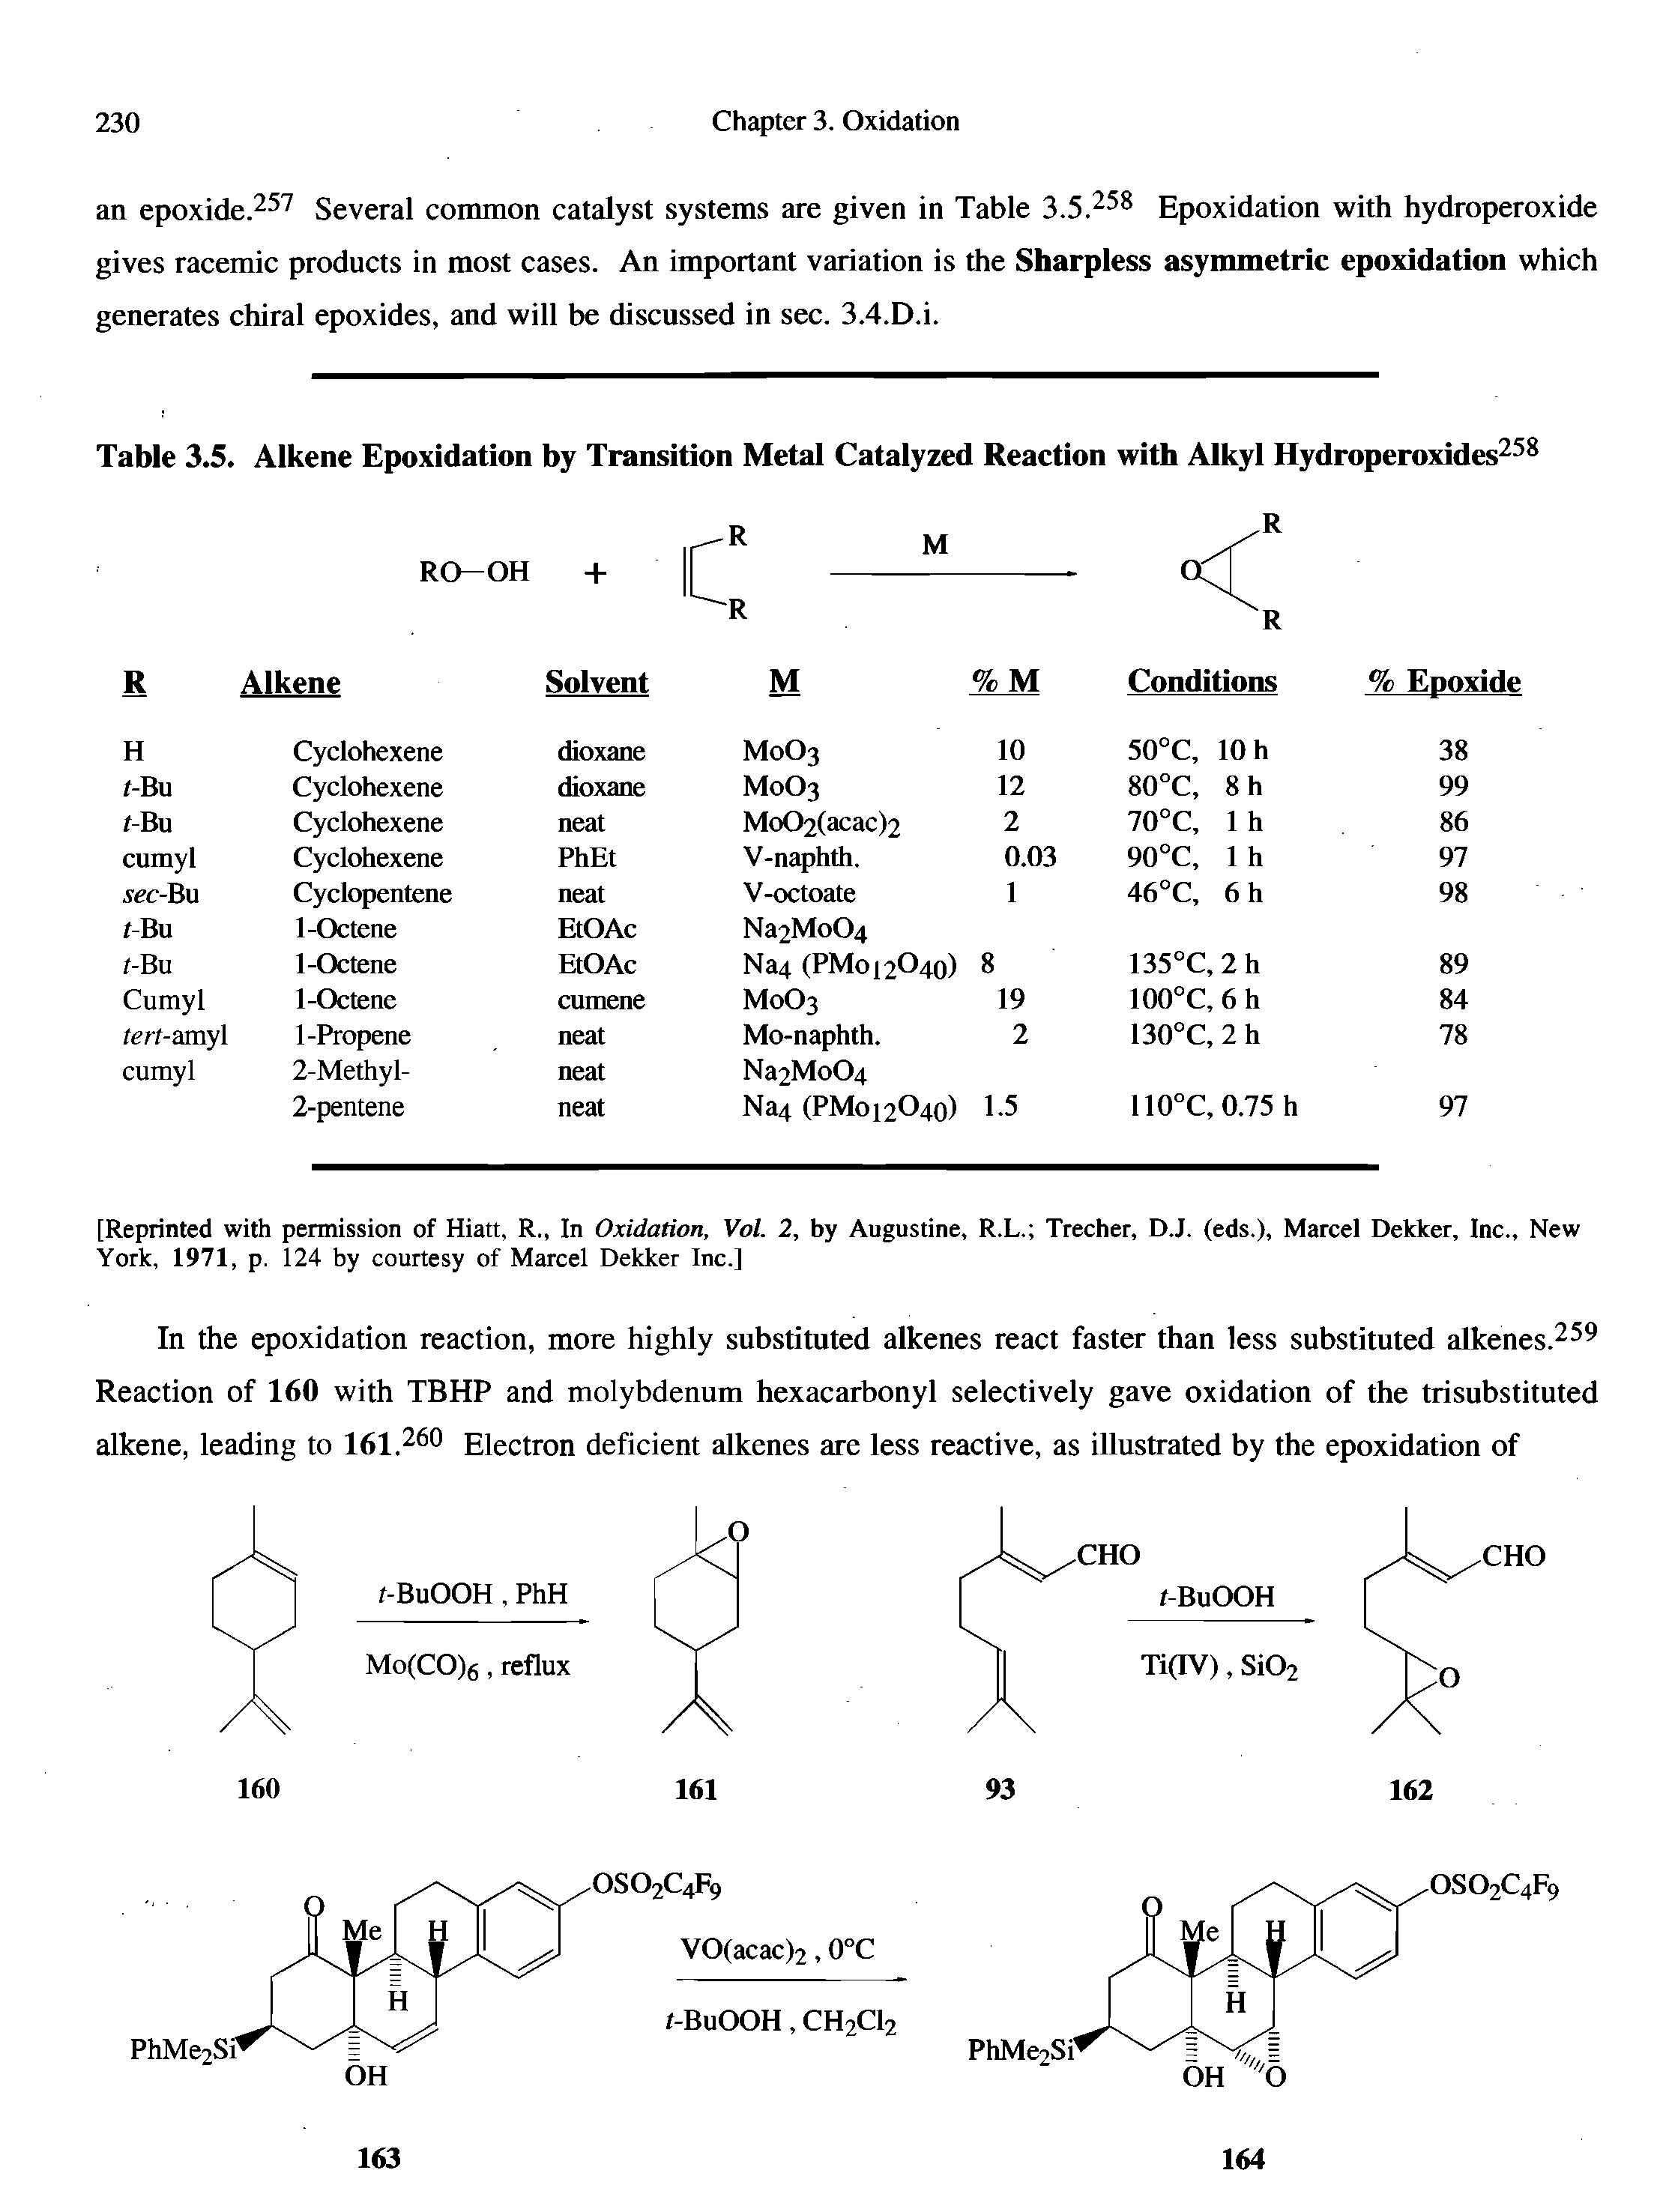 Table 3.5. Alkene Epoxidation by Transition Metal Catalyzed Reaction with Alkyl Hydroperoxides SS...